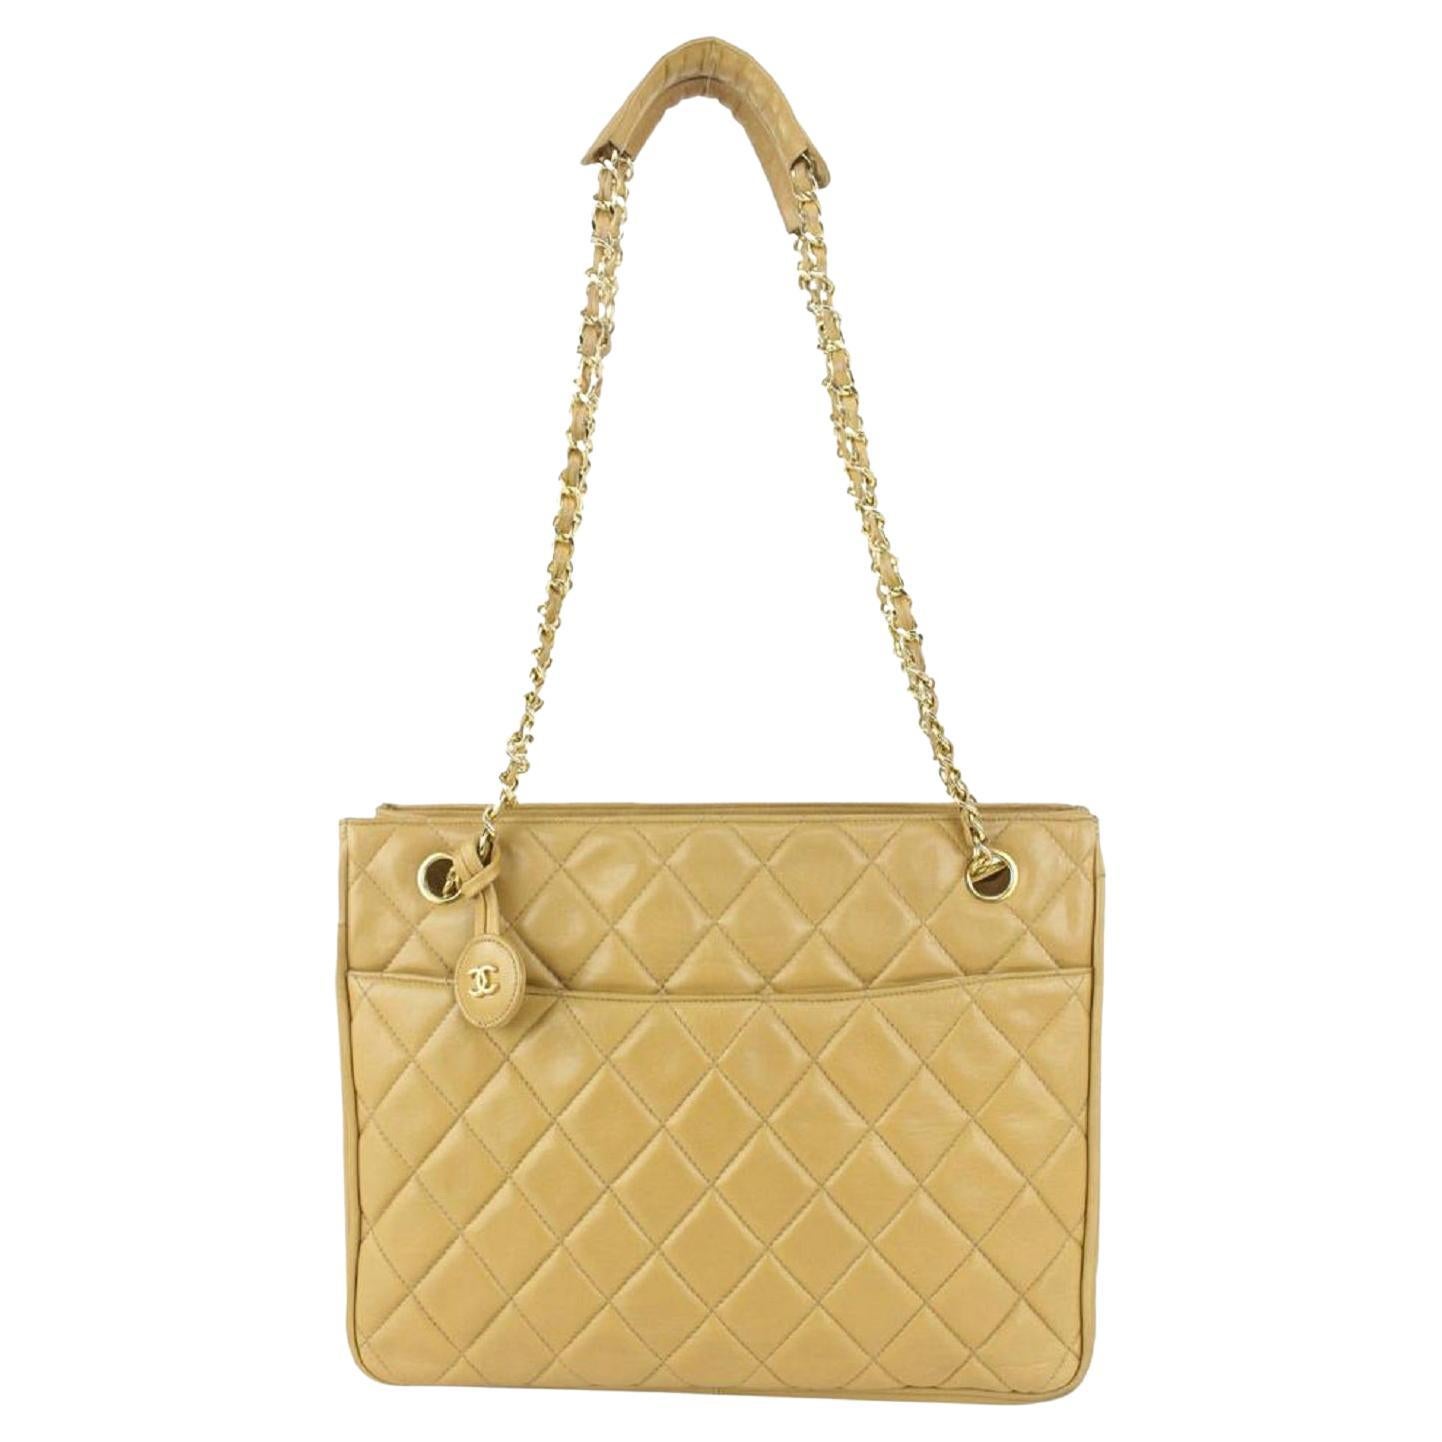 Chanel Beige Quilted Lambskin ShopperTote Chain Bag 593cas615